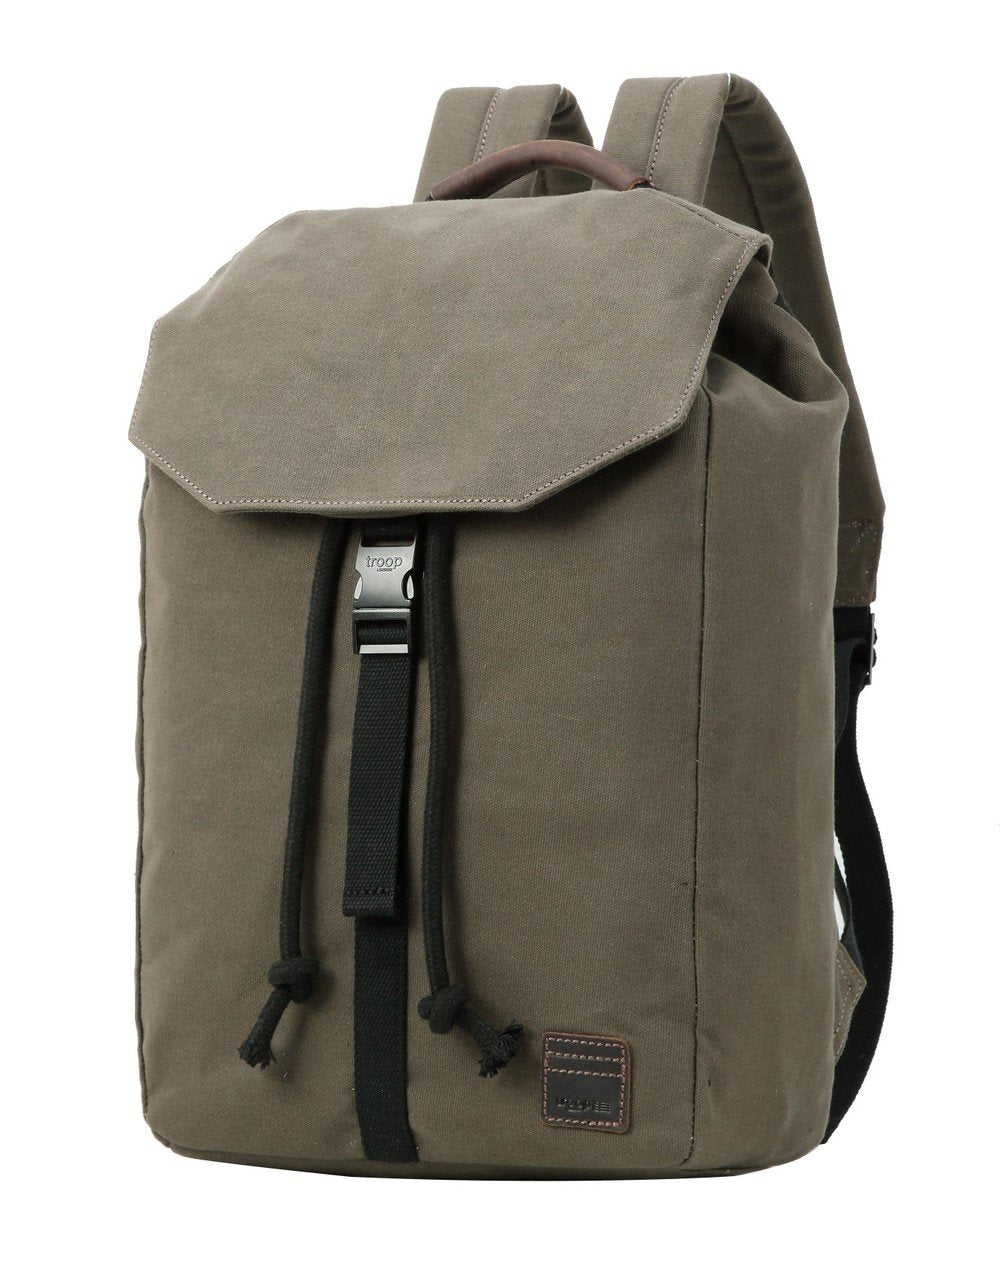 Bergen backpack which has many features including high quality hardware clip buckle, a branded fully-lined interior, wax coated treatment to create a water resistant barrier, multiple pockets to keep you organised, a leather wrapped top carry handle and a padded, adjustable back strap for extra comfort for everyday travelling. Front facing orientation..